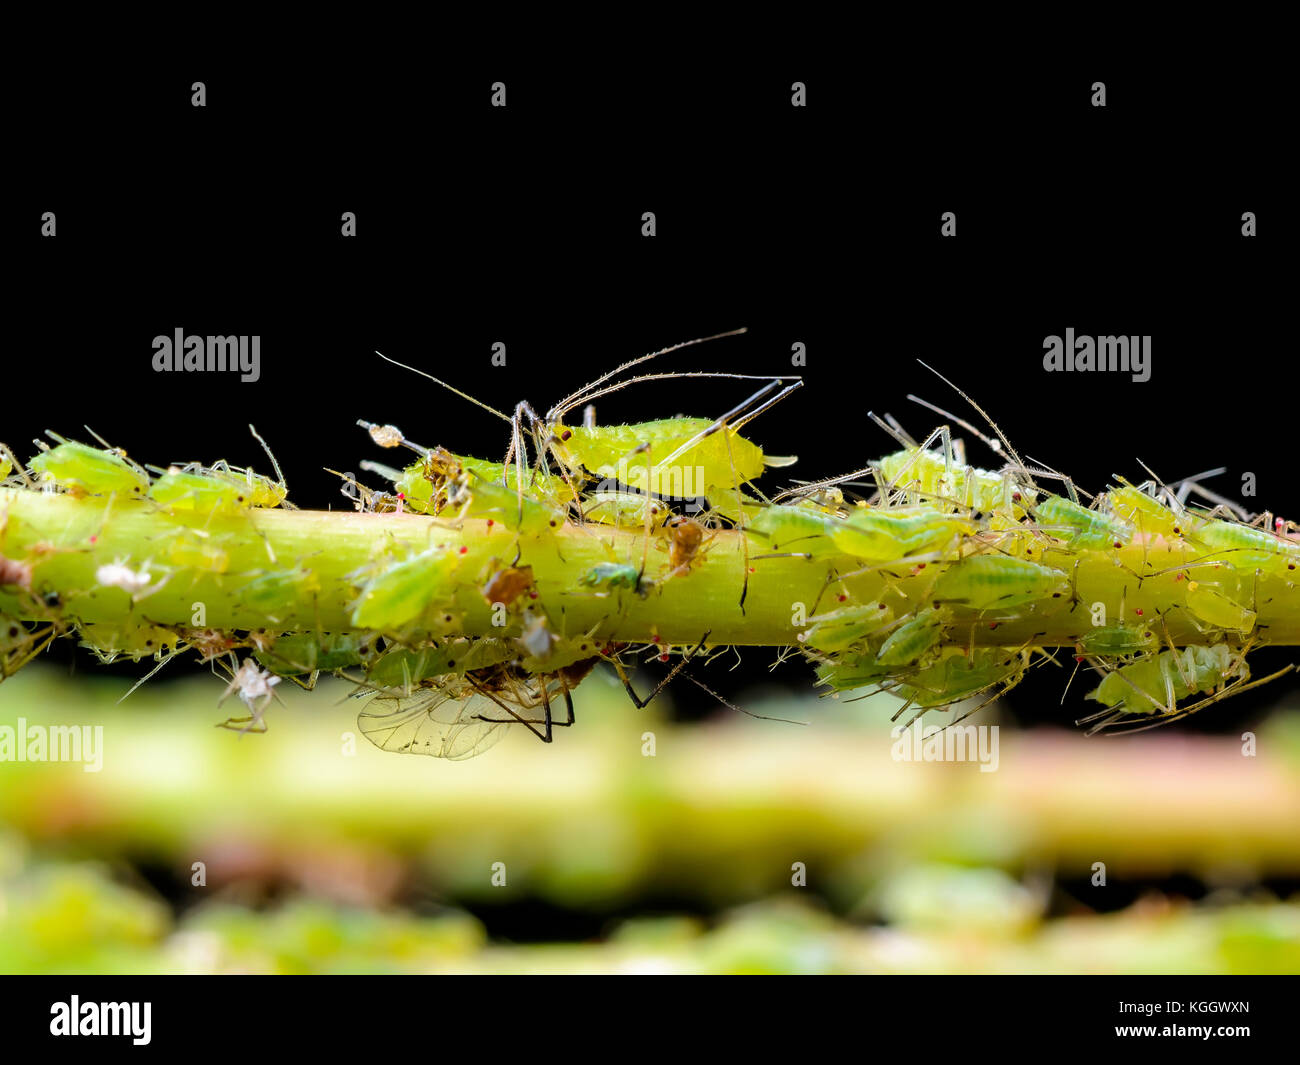 Aphid Colony on Green Twig on Dark Background Stock Photo